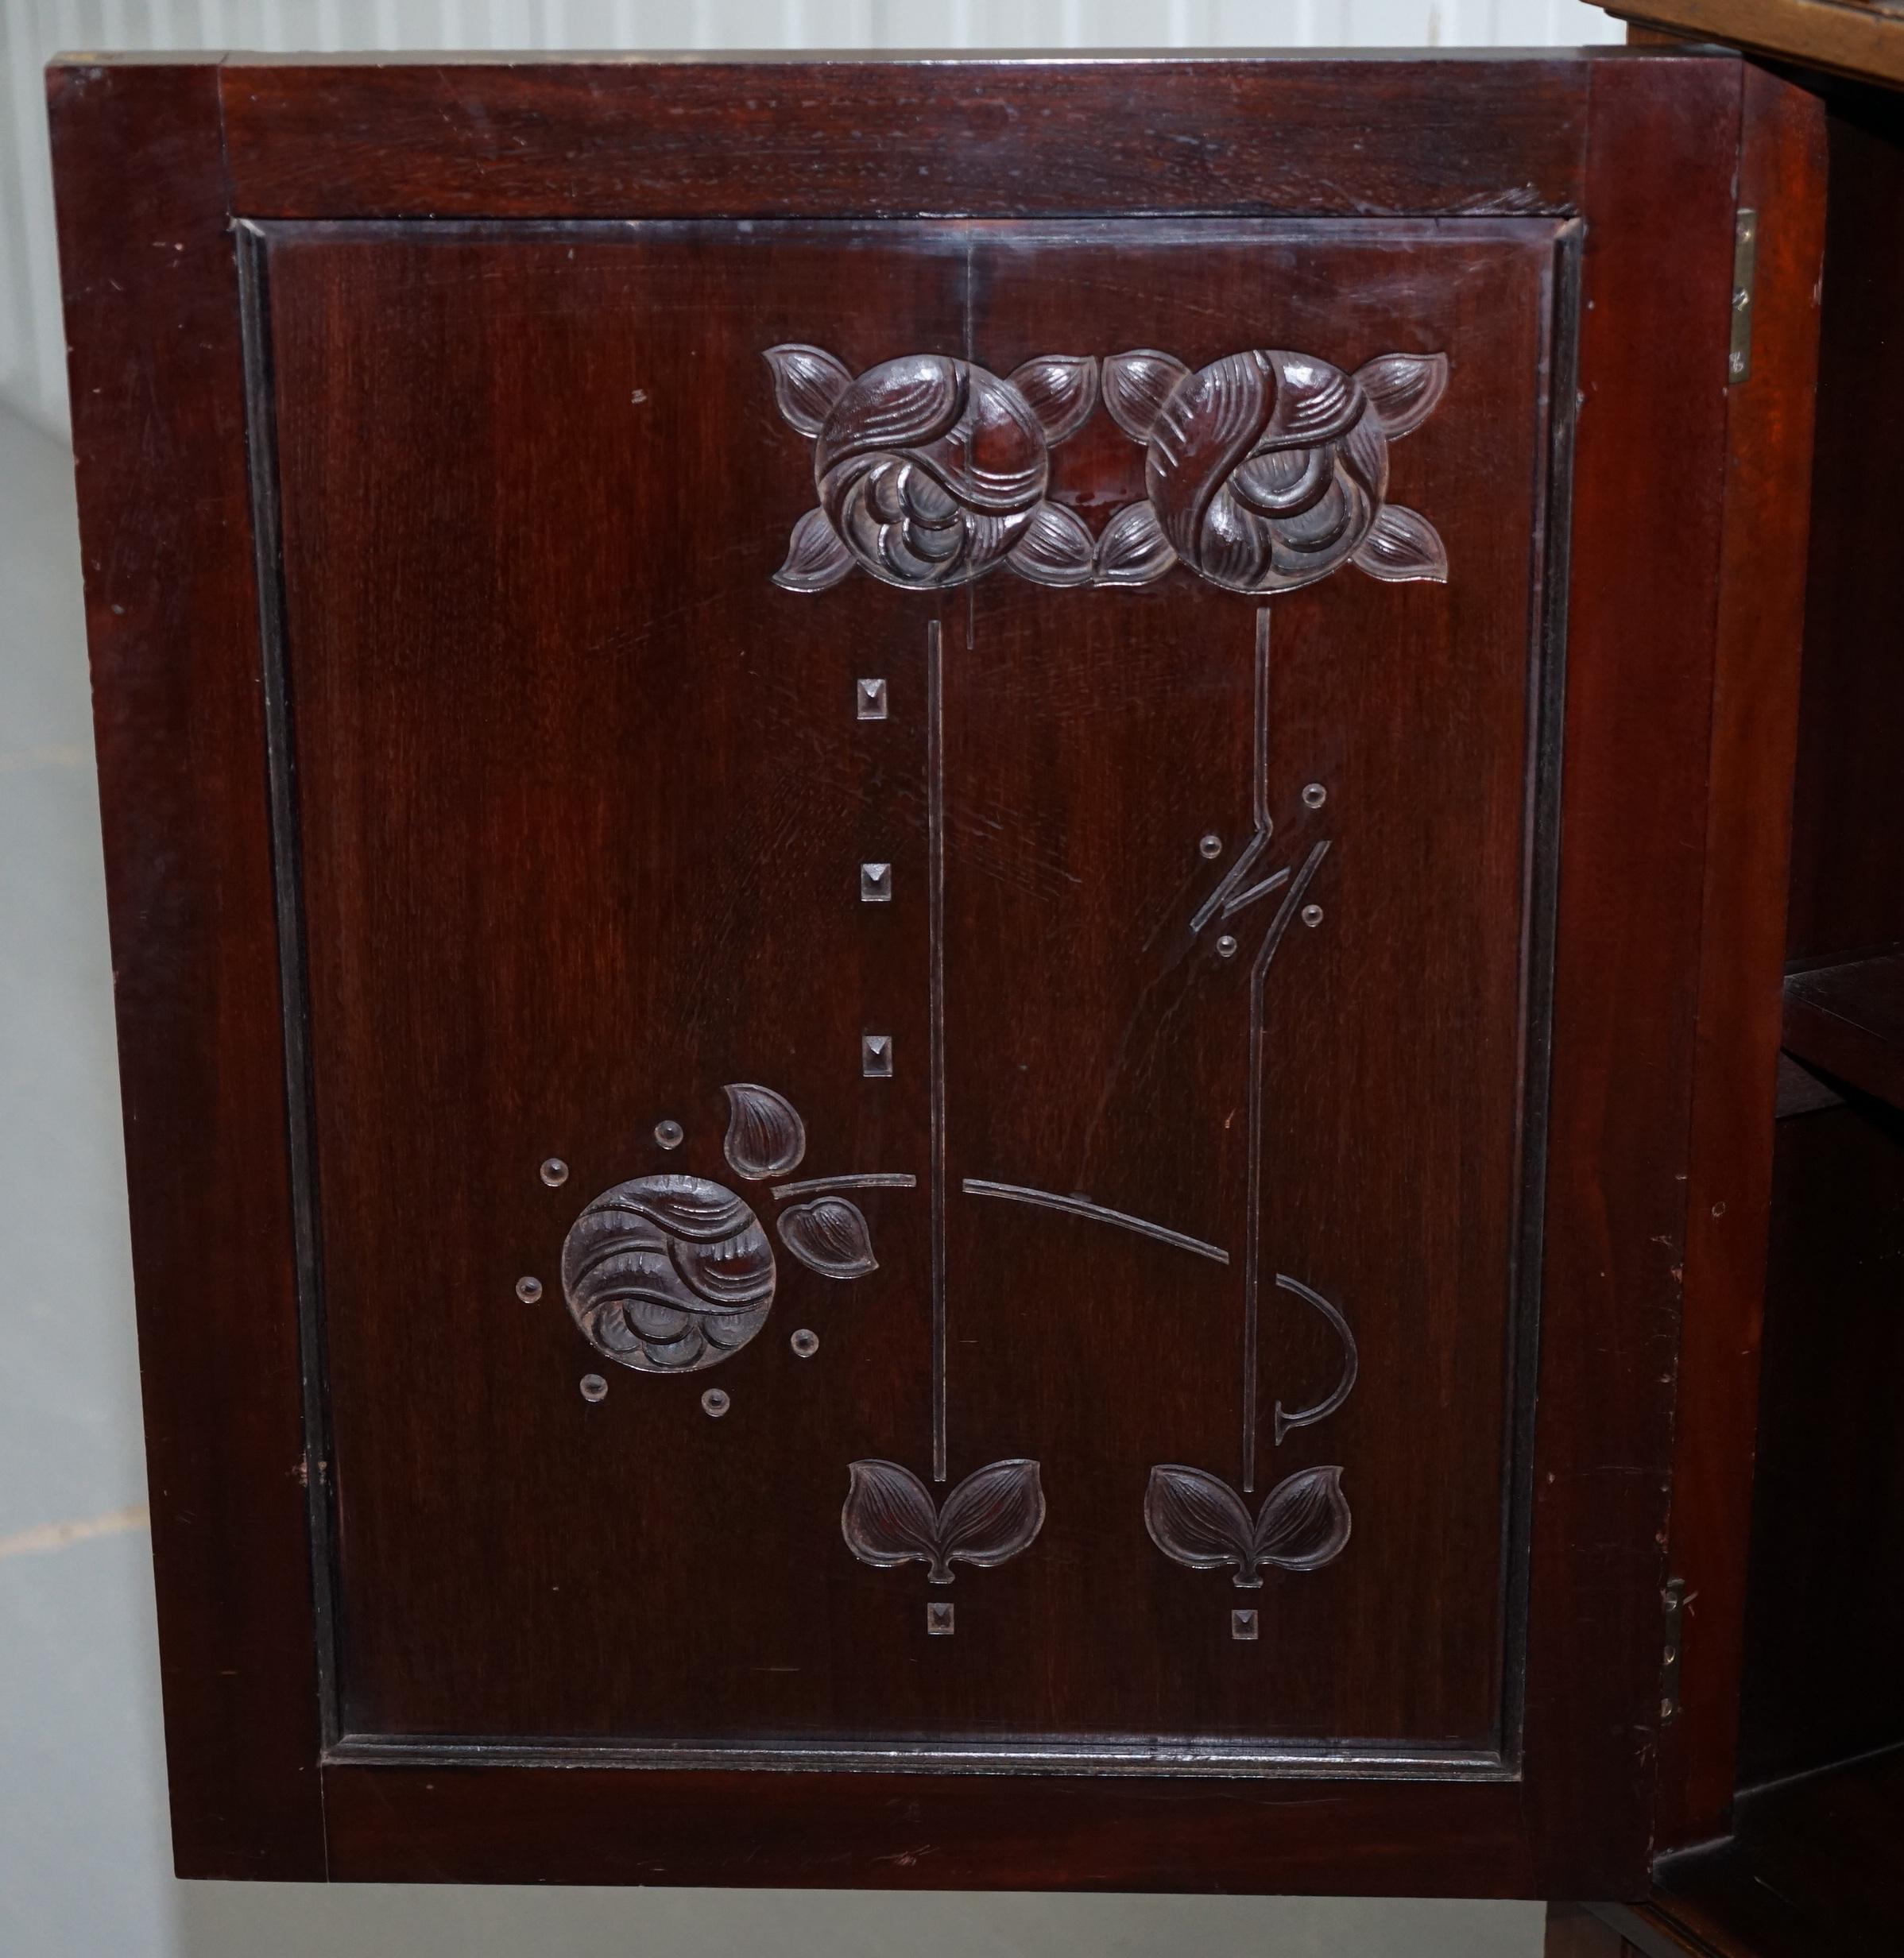 Stunning Liberty's of London Arts & Crafts Carved Bookcase Cabinet Dresser 7